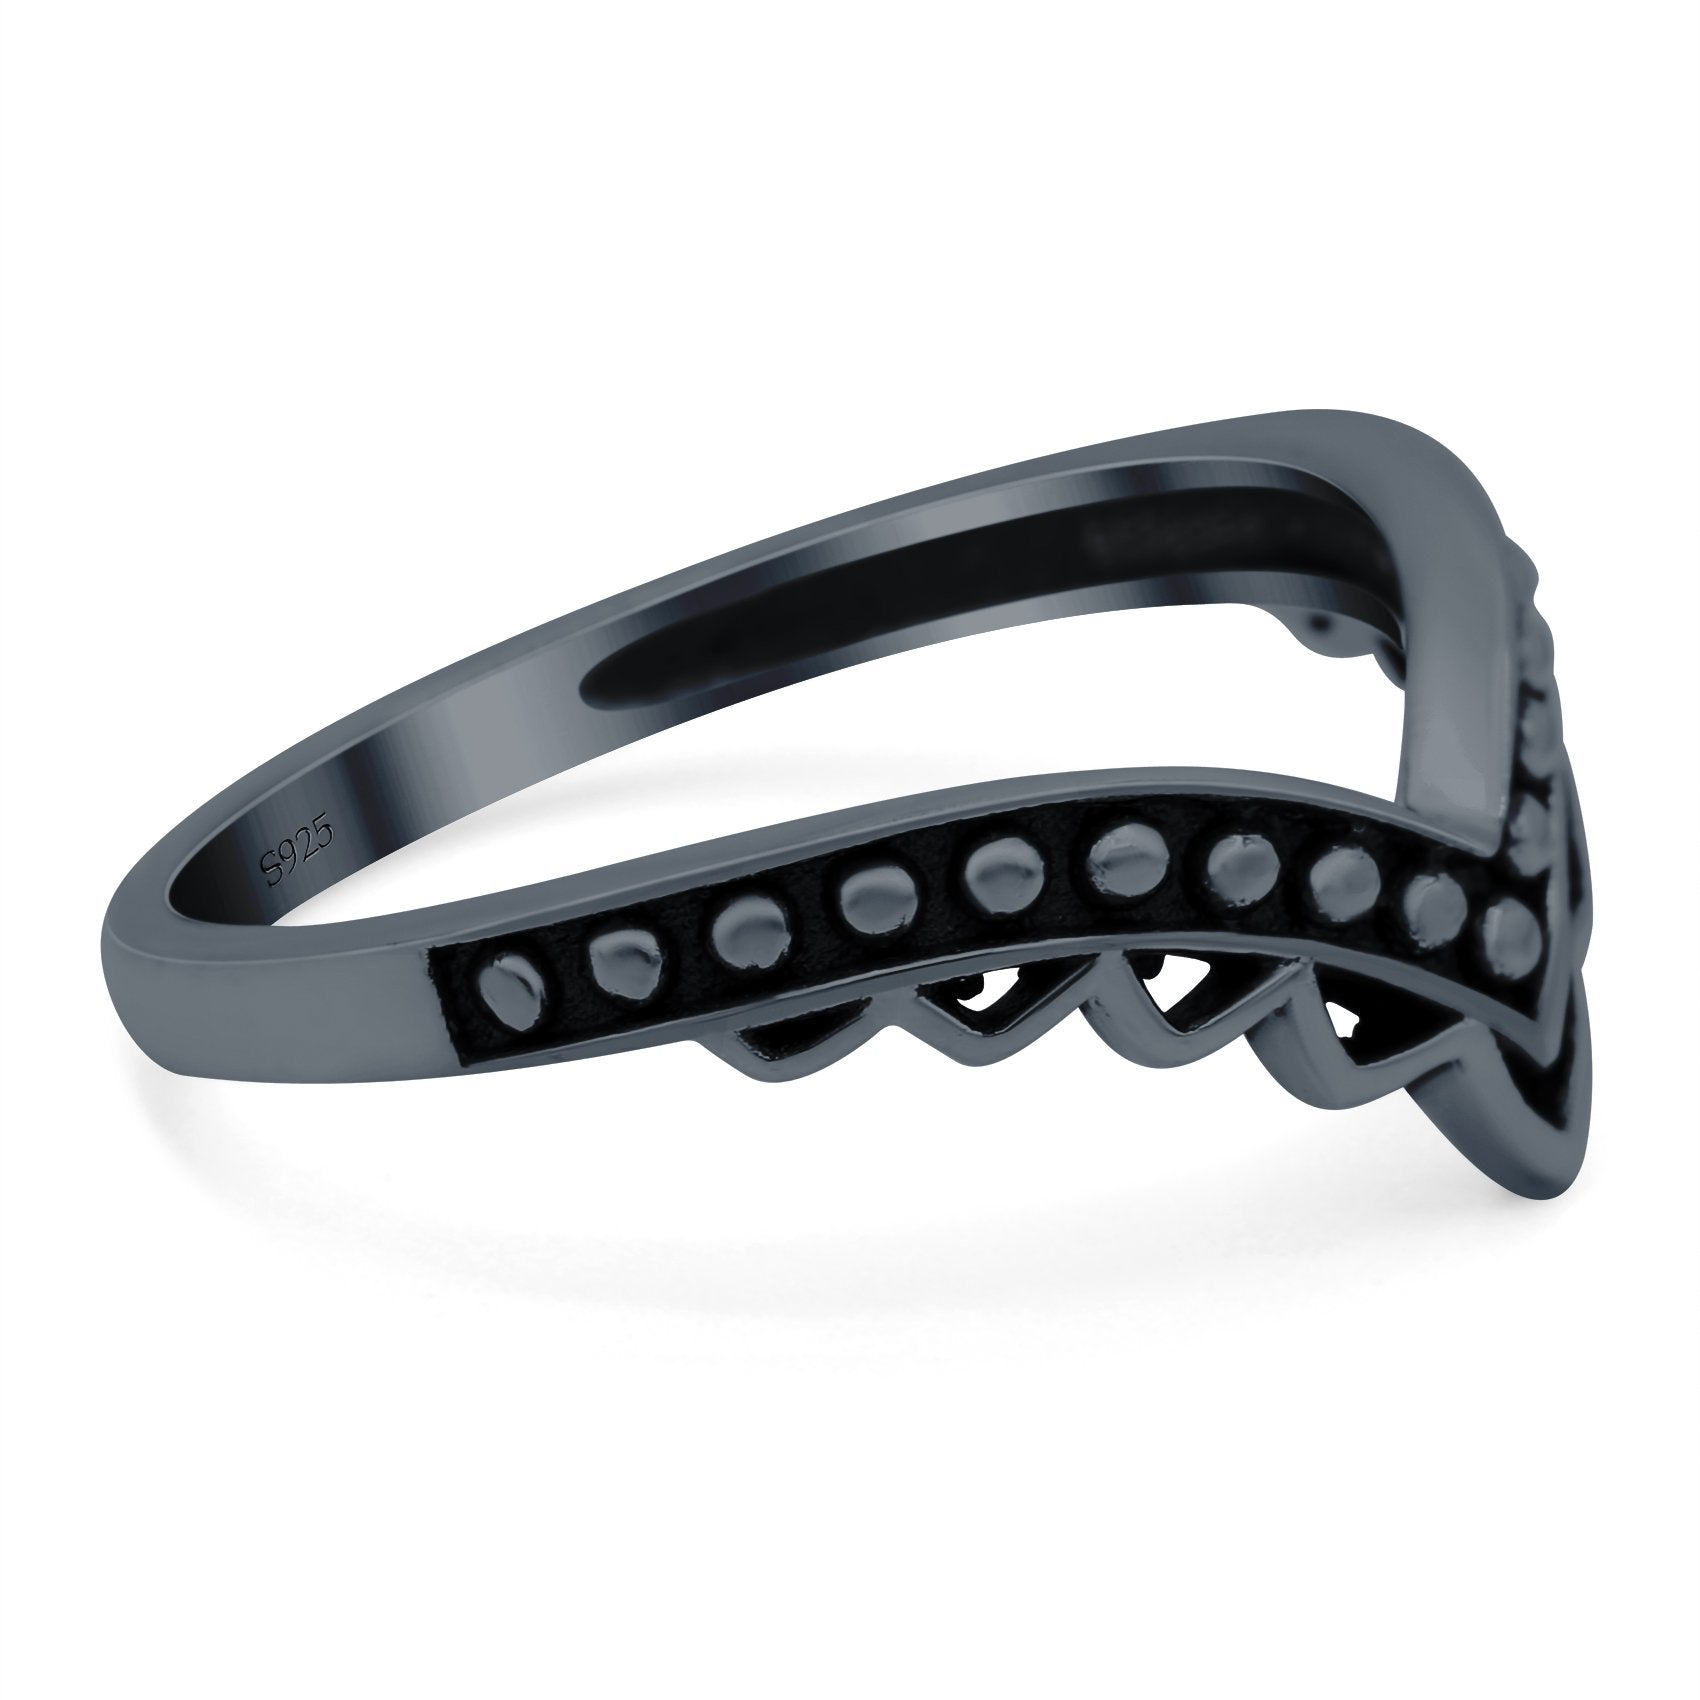 V Ring Oxidized Band Solid 925 Sterling Silver Thumb Ring (9mm)